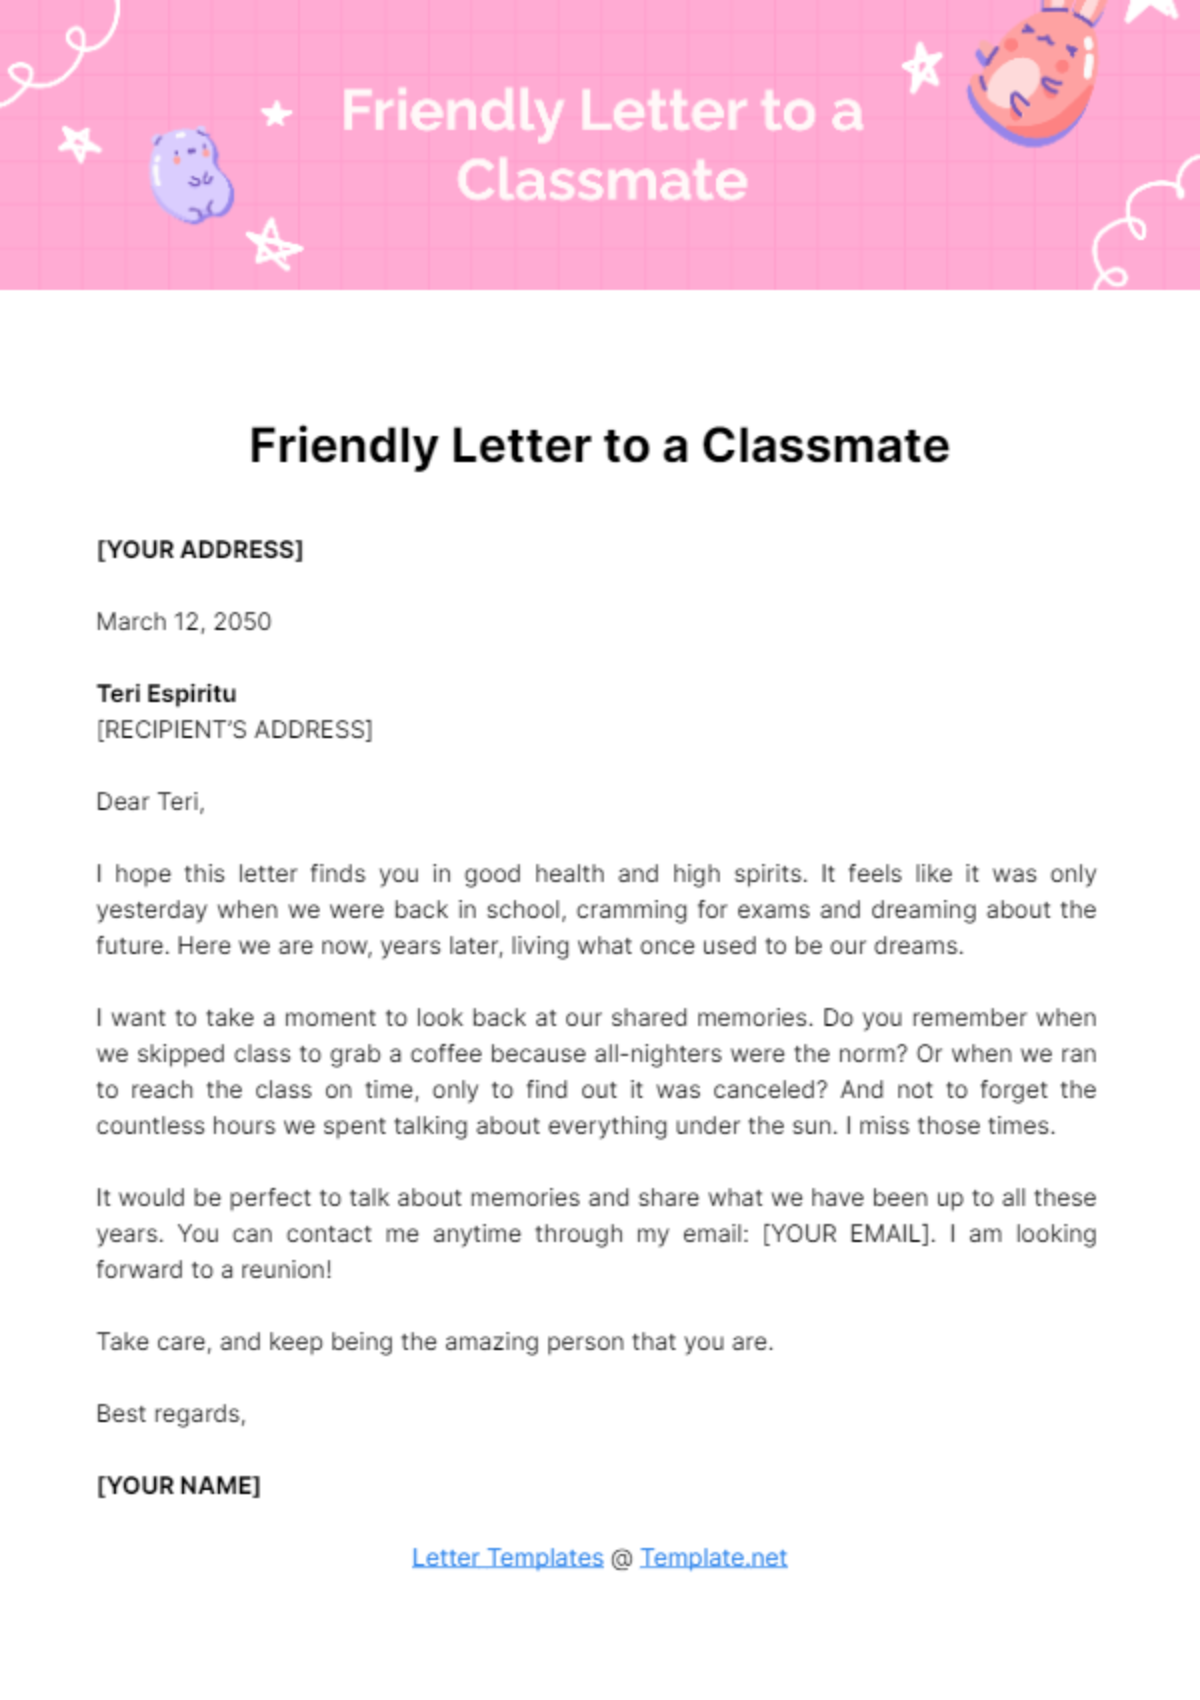 Free Friendly Letter to a Classmate Template